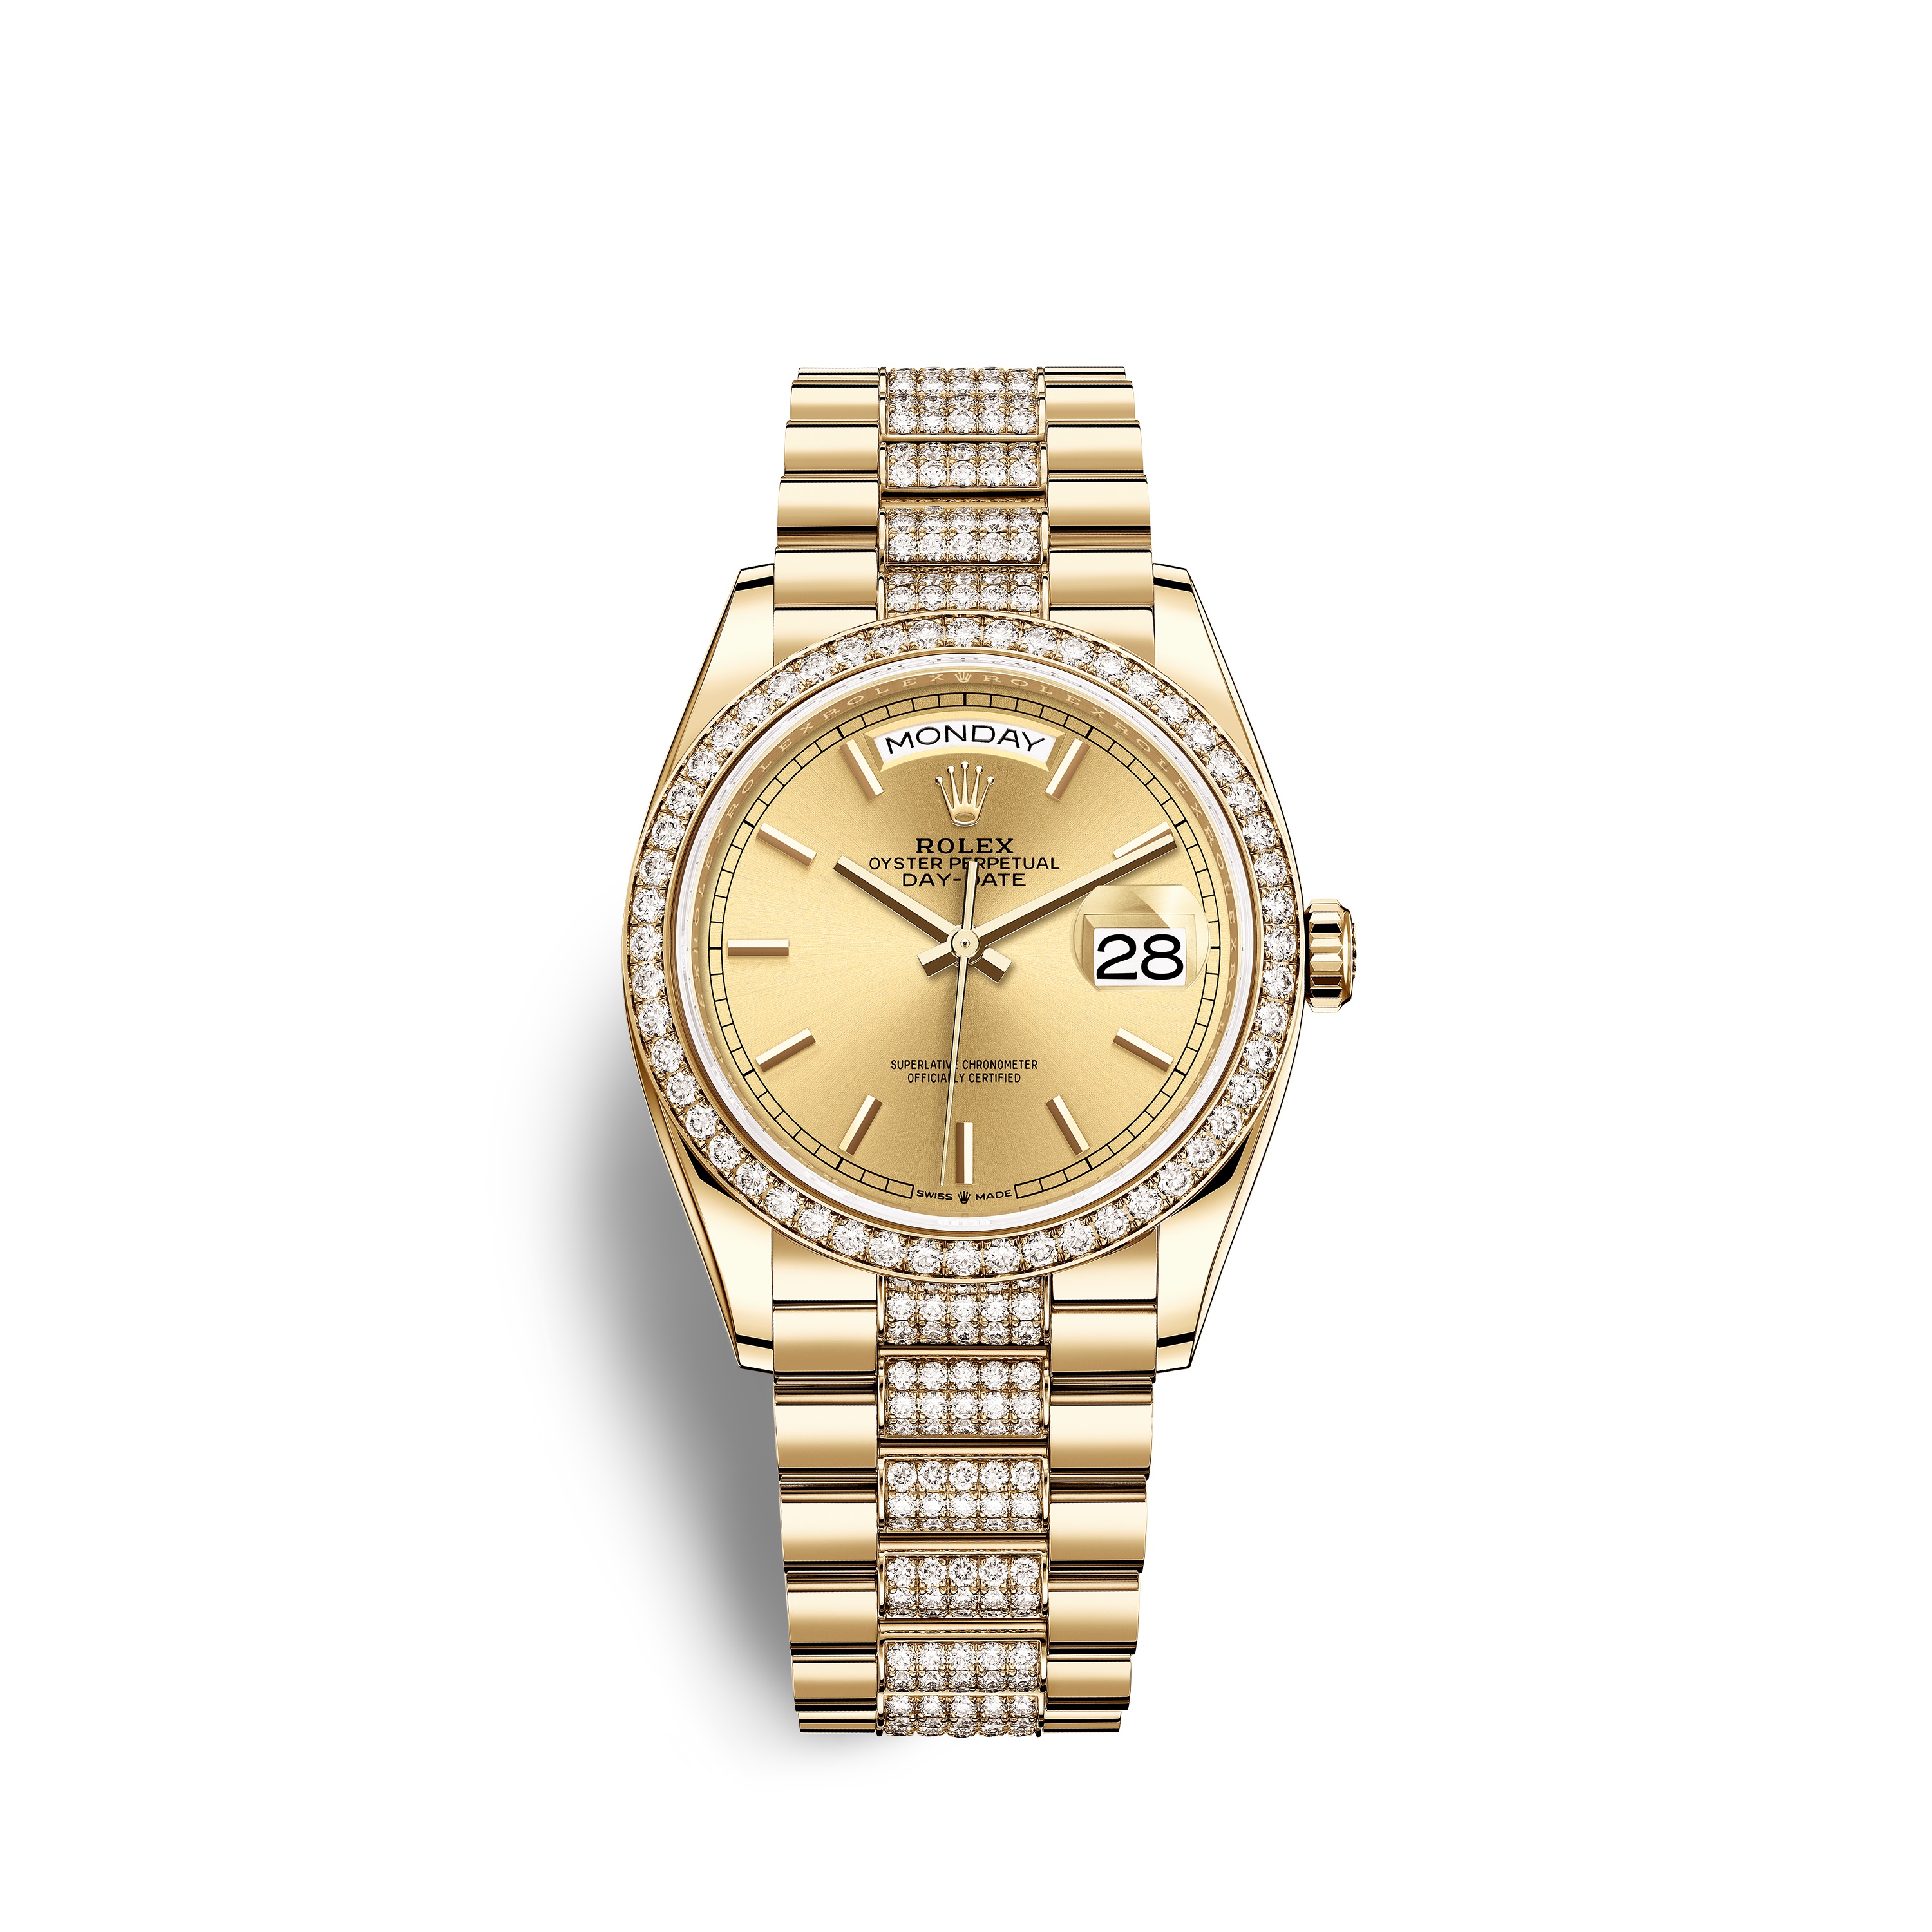 Day-Date 36 128348RBR Gold & Diamonds Watch (Champagne-Colour)